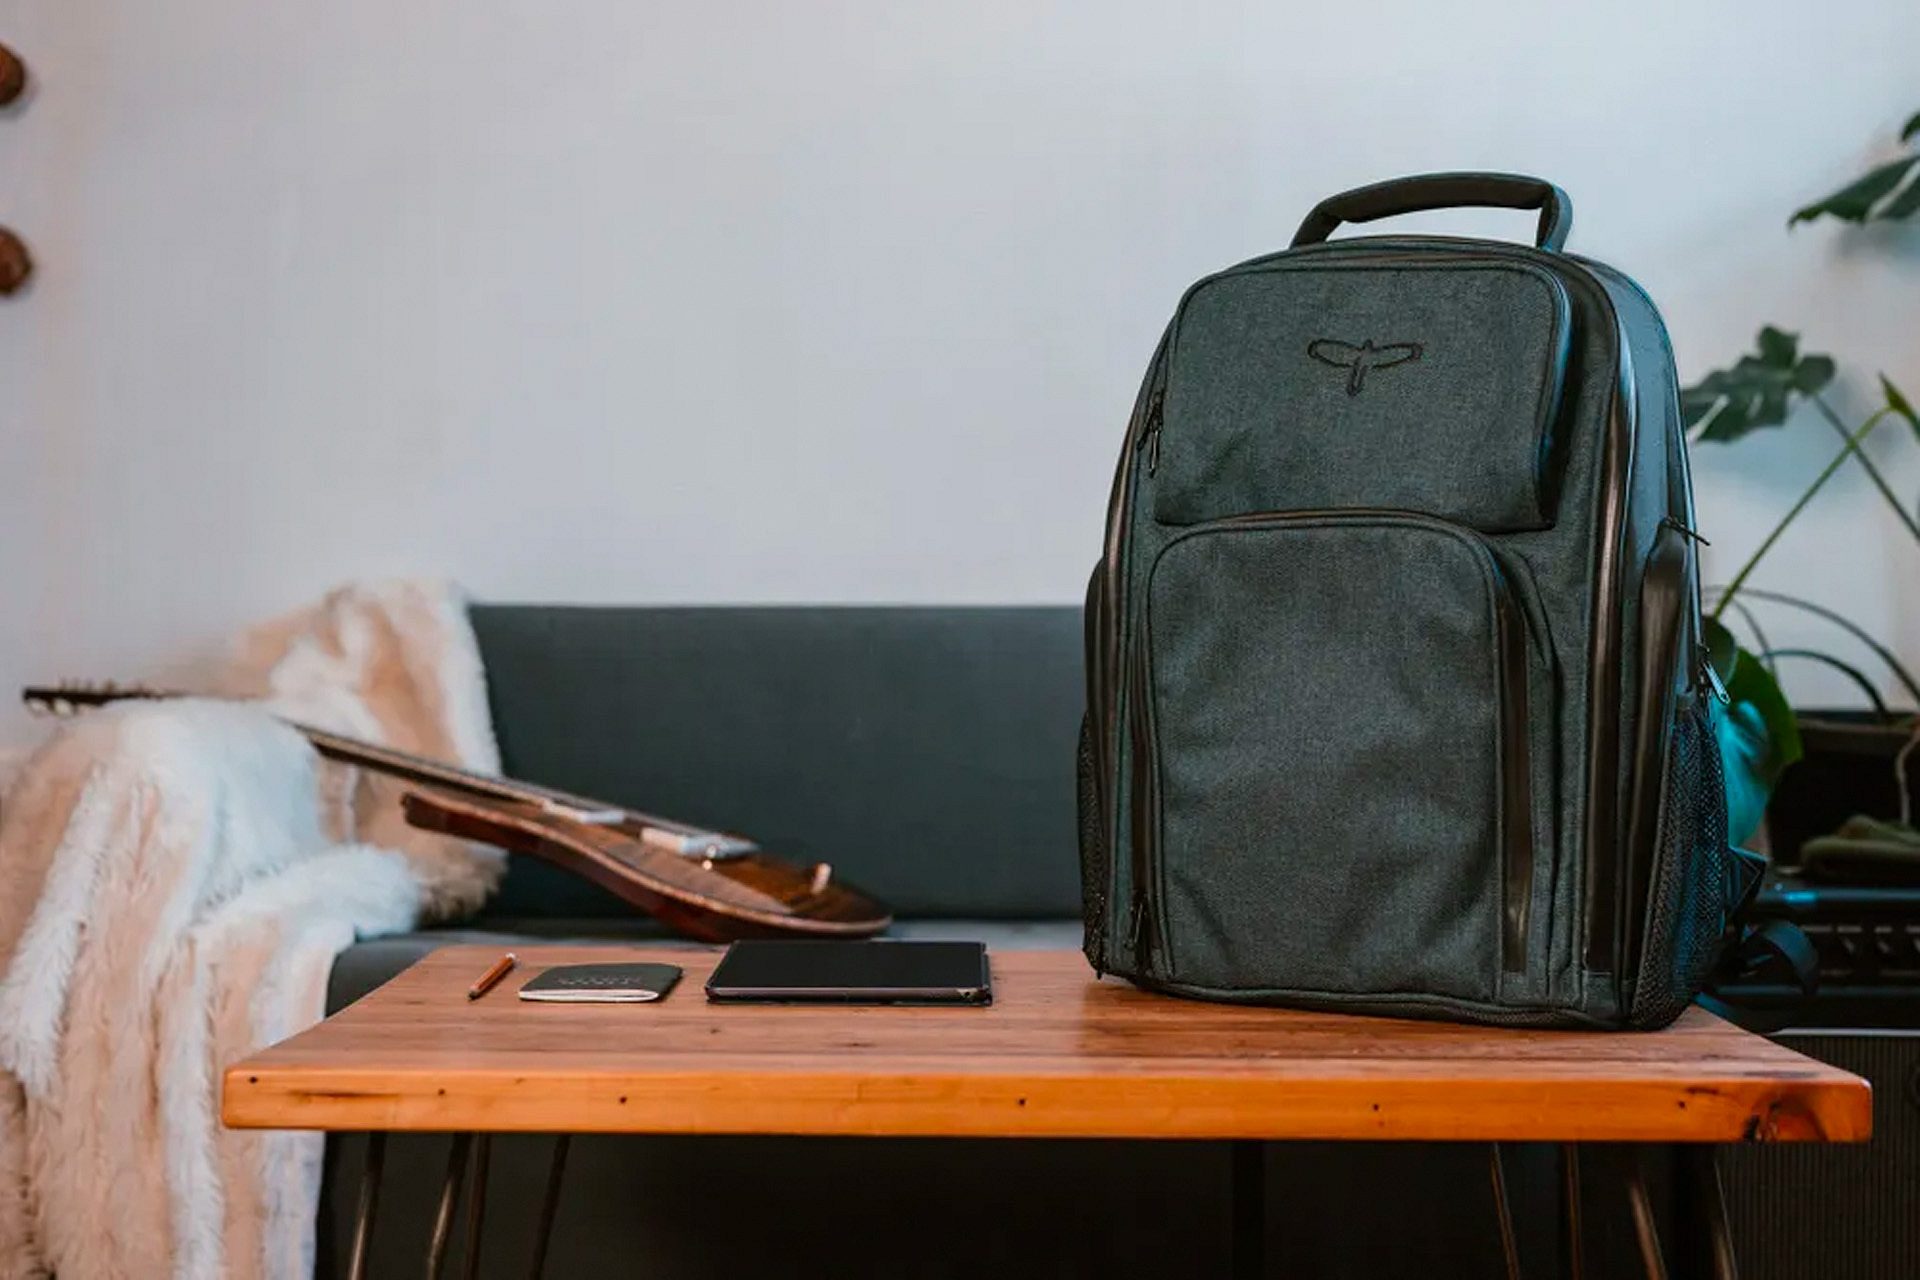 Meet the PRS Muscian's Go-Bag Backpack